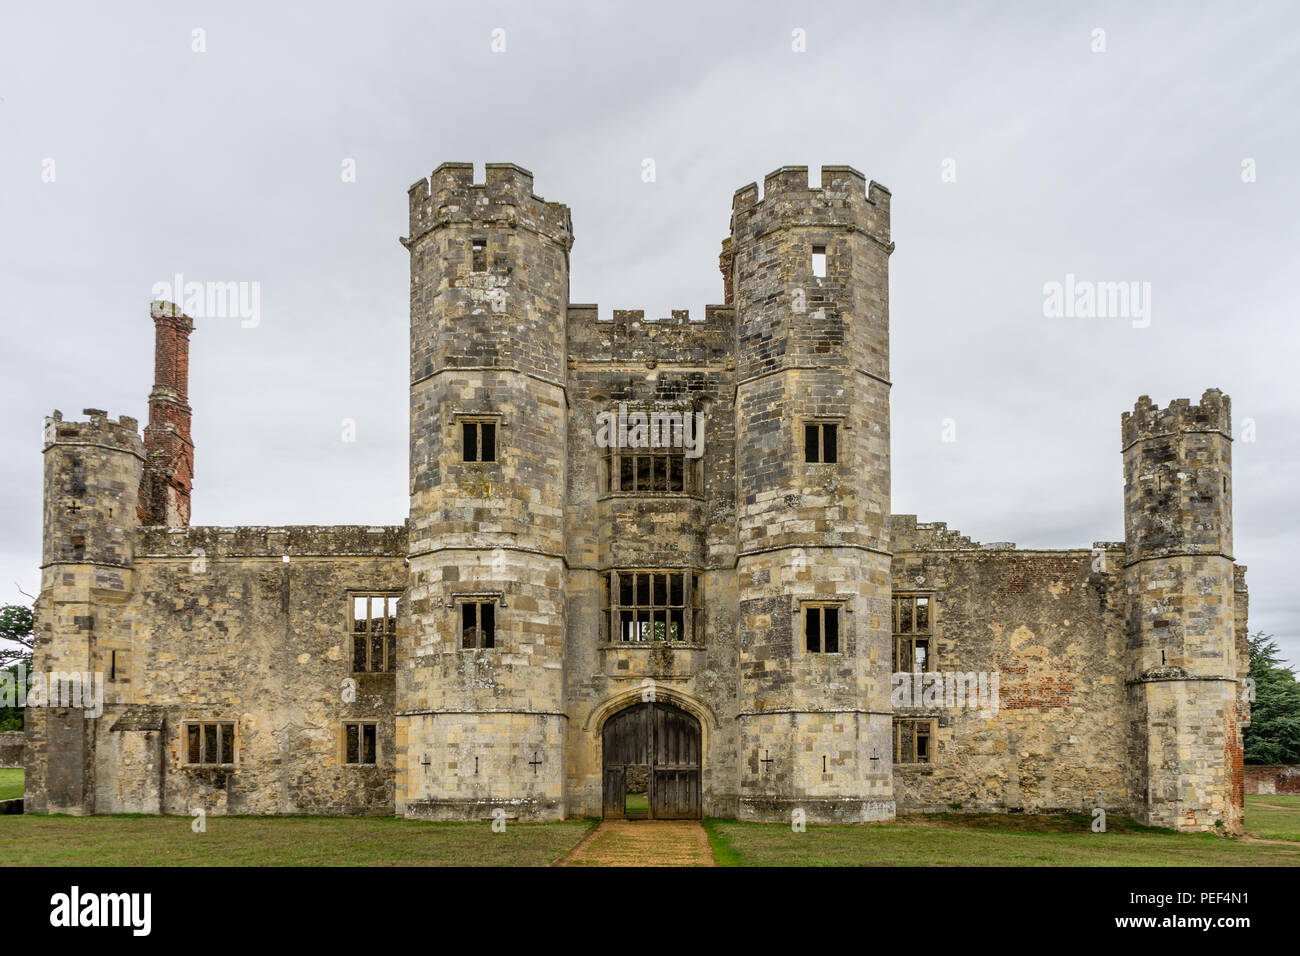 The remains / ruin of the medieval Titchfield Abbey surrounded by the Hampshire countryside, English Heritage site, Titchfield, Hampshire, England, UK Stock Photo